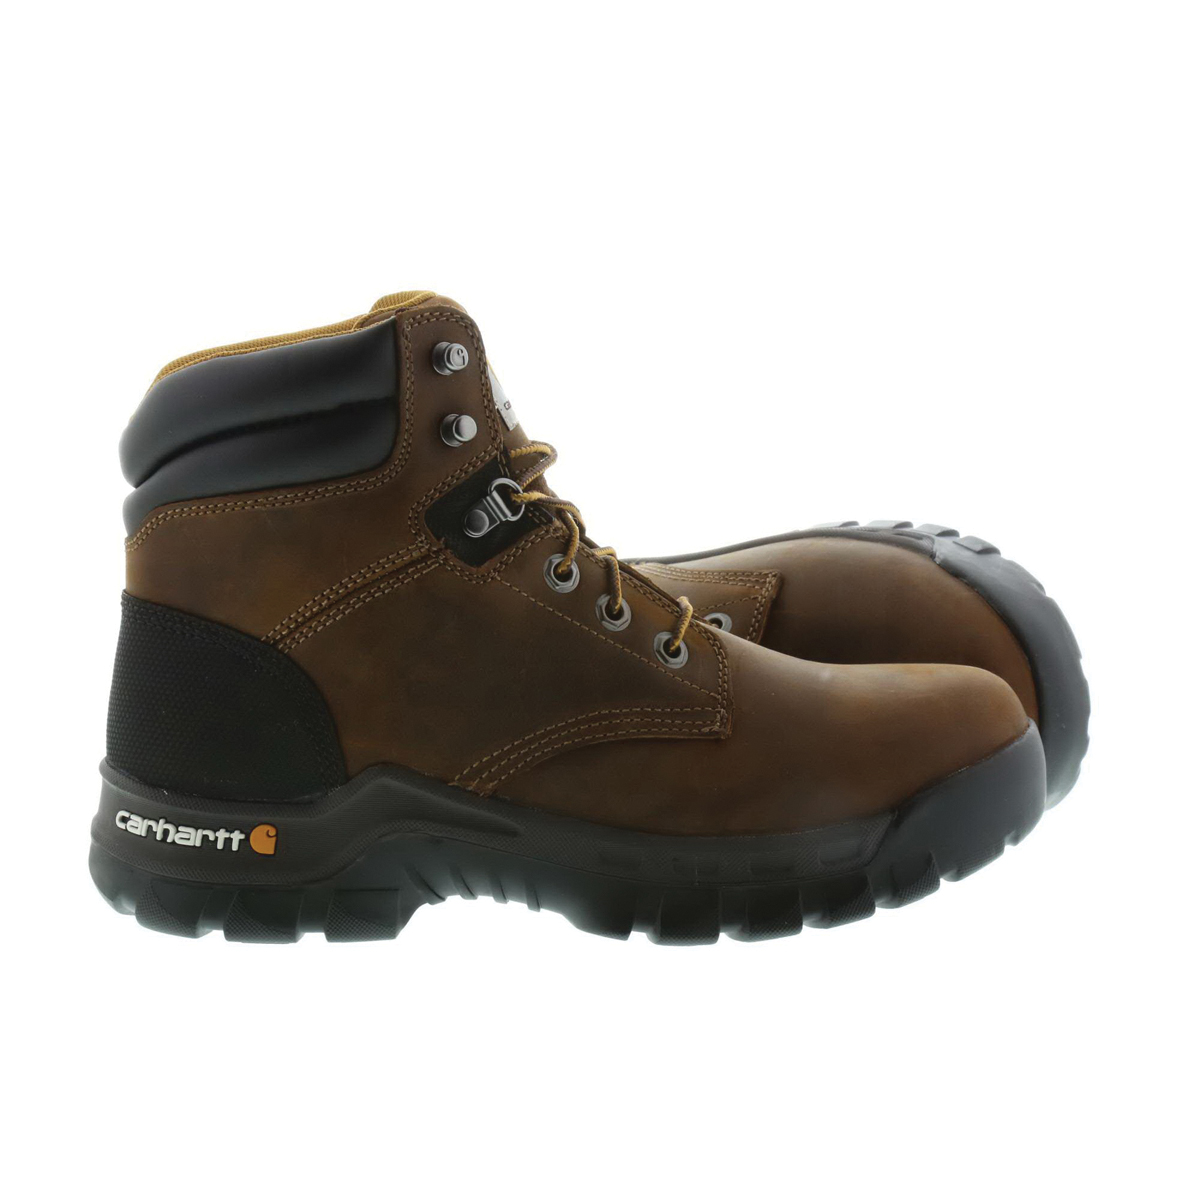 Carhartt CMF6366-BOD-9.5W Work Boots, 9.5, W, Brown Oil Tanned, Leather Upper, Lace-Up Closure - 3